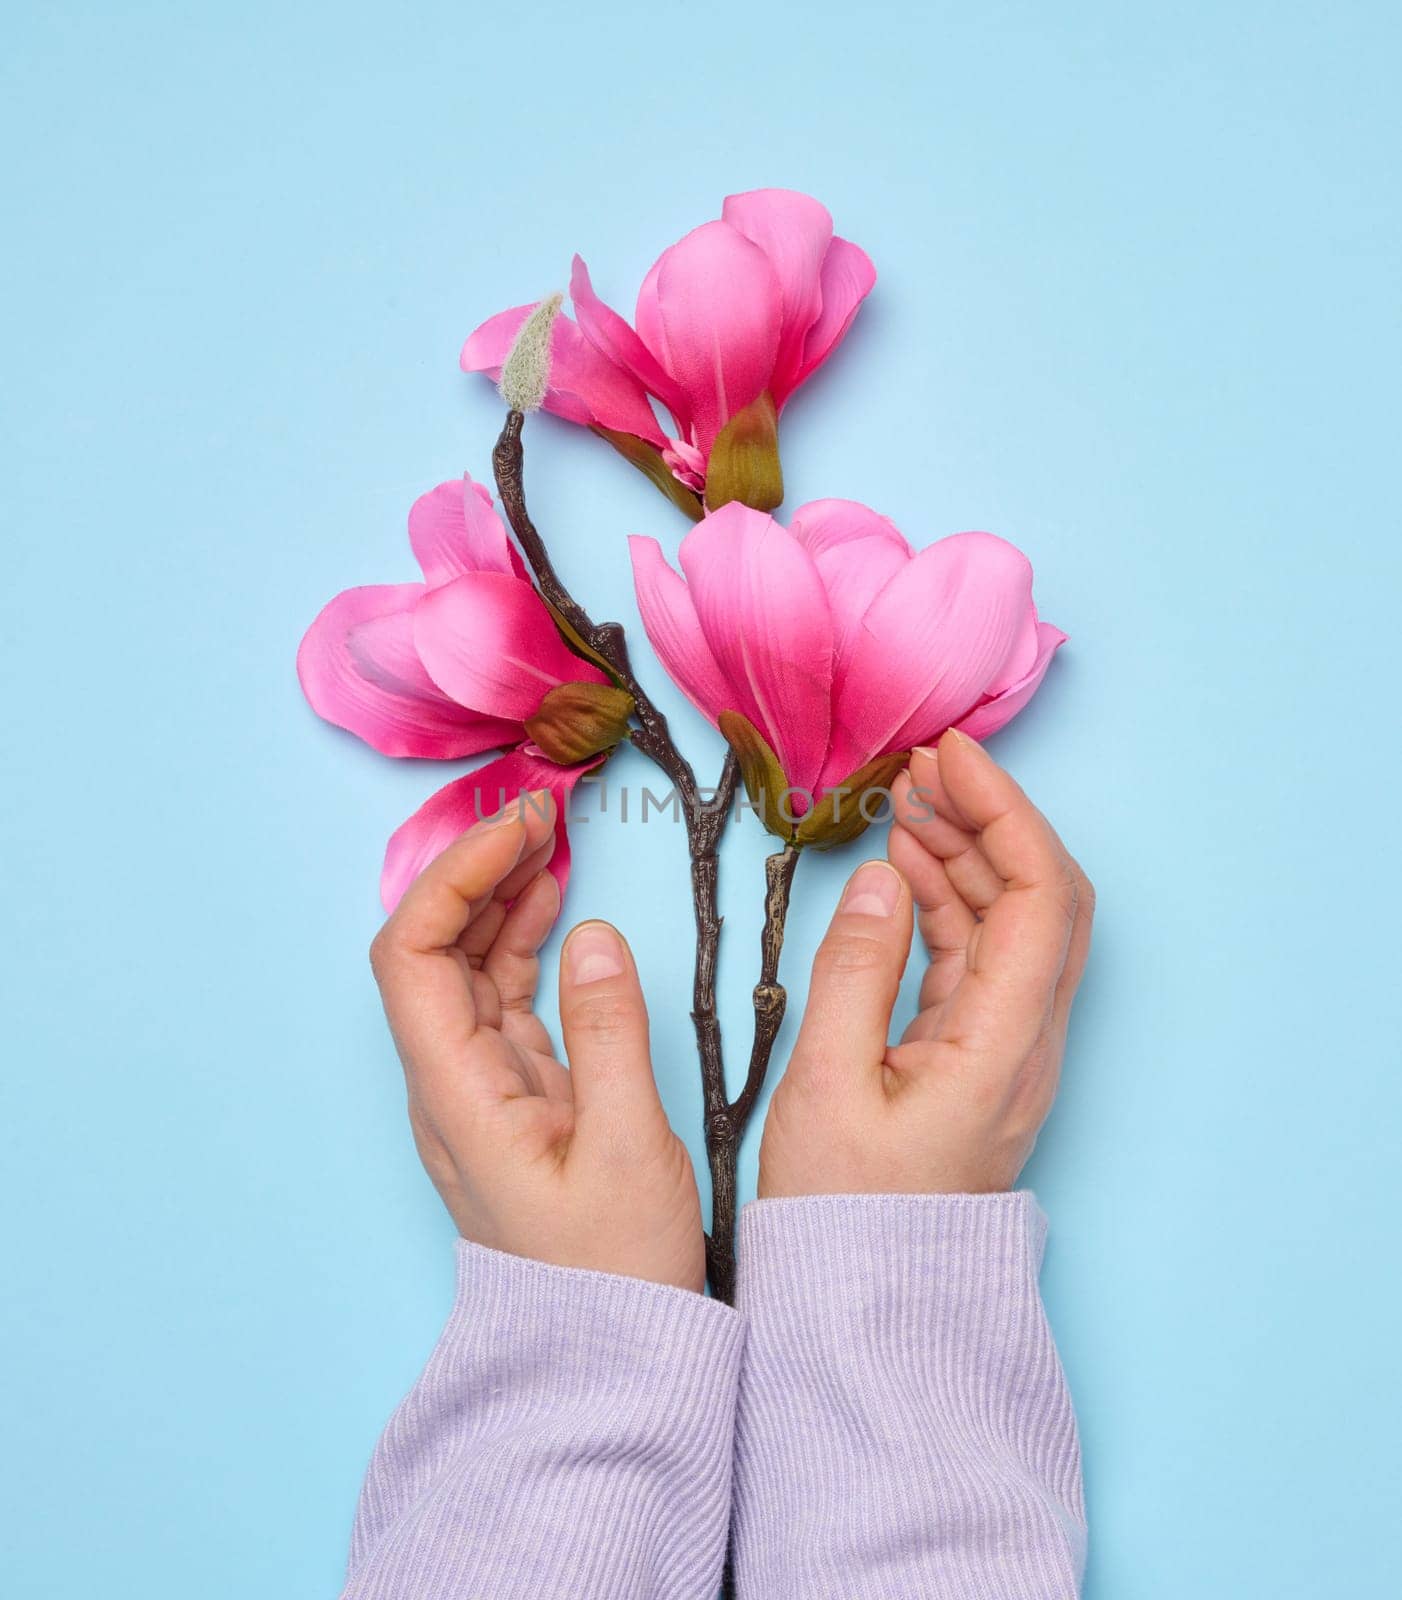 Two female hands holding a branch of pink magnolia on a blue background by ndanko